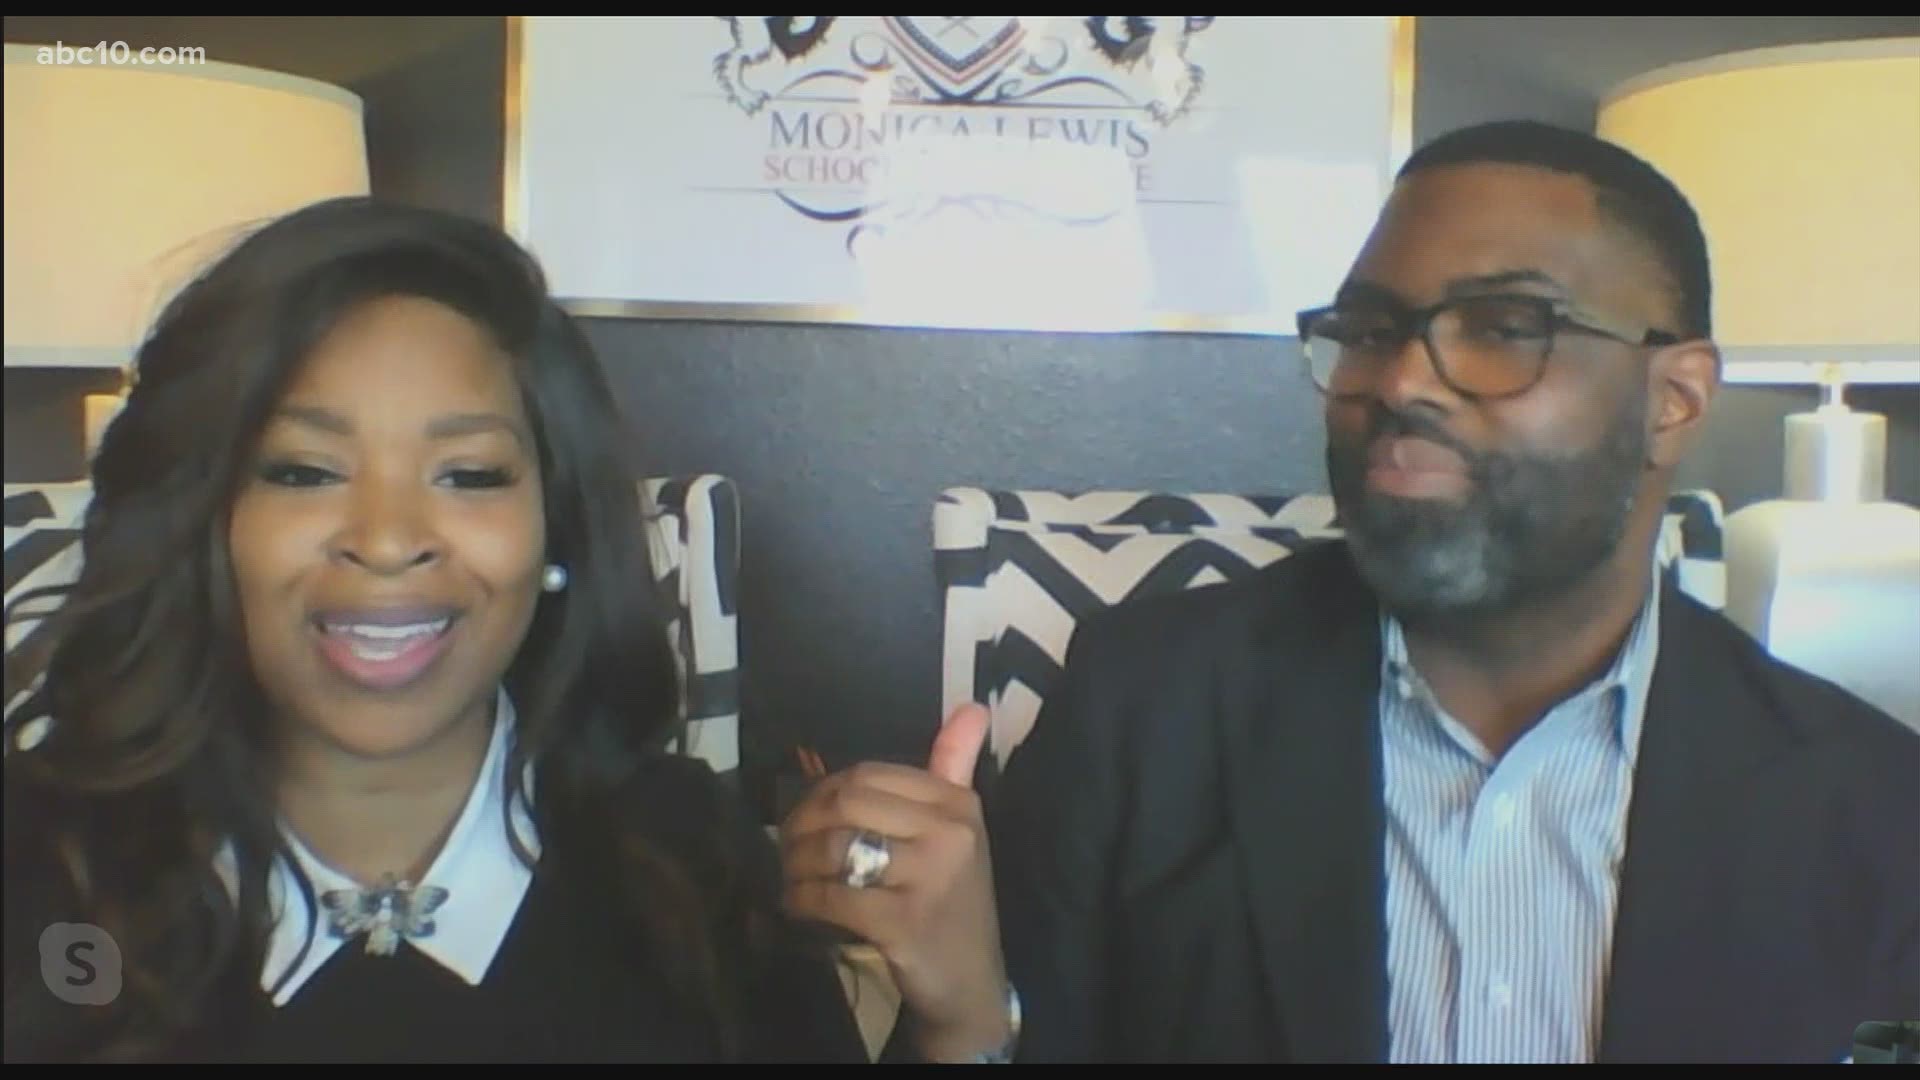 Etiquette Expert’s Monica and Darian Lewis talk about using civility when discussing racism and injustice.